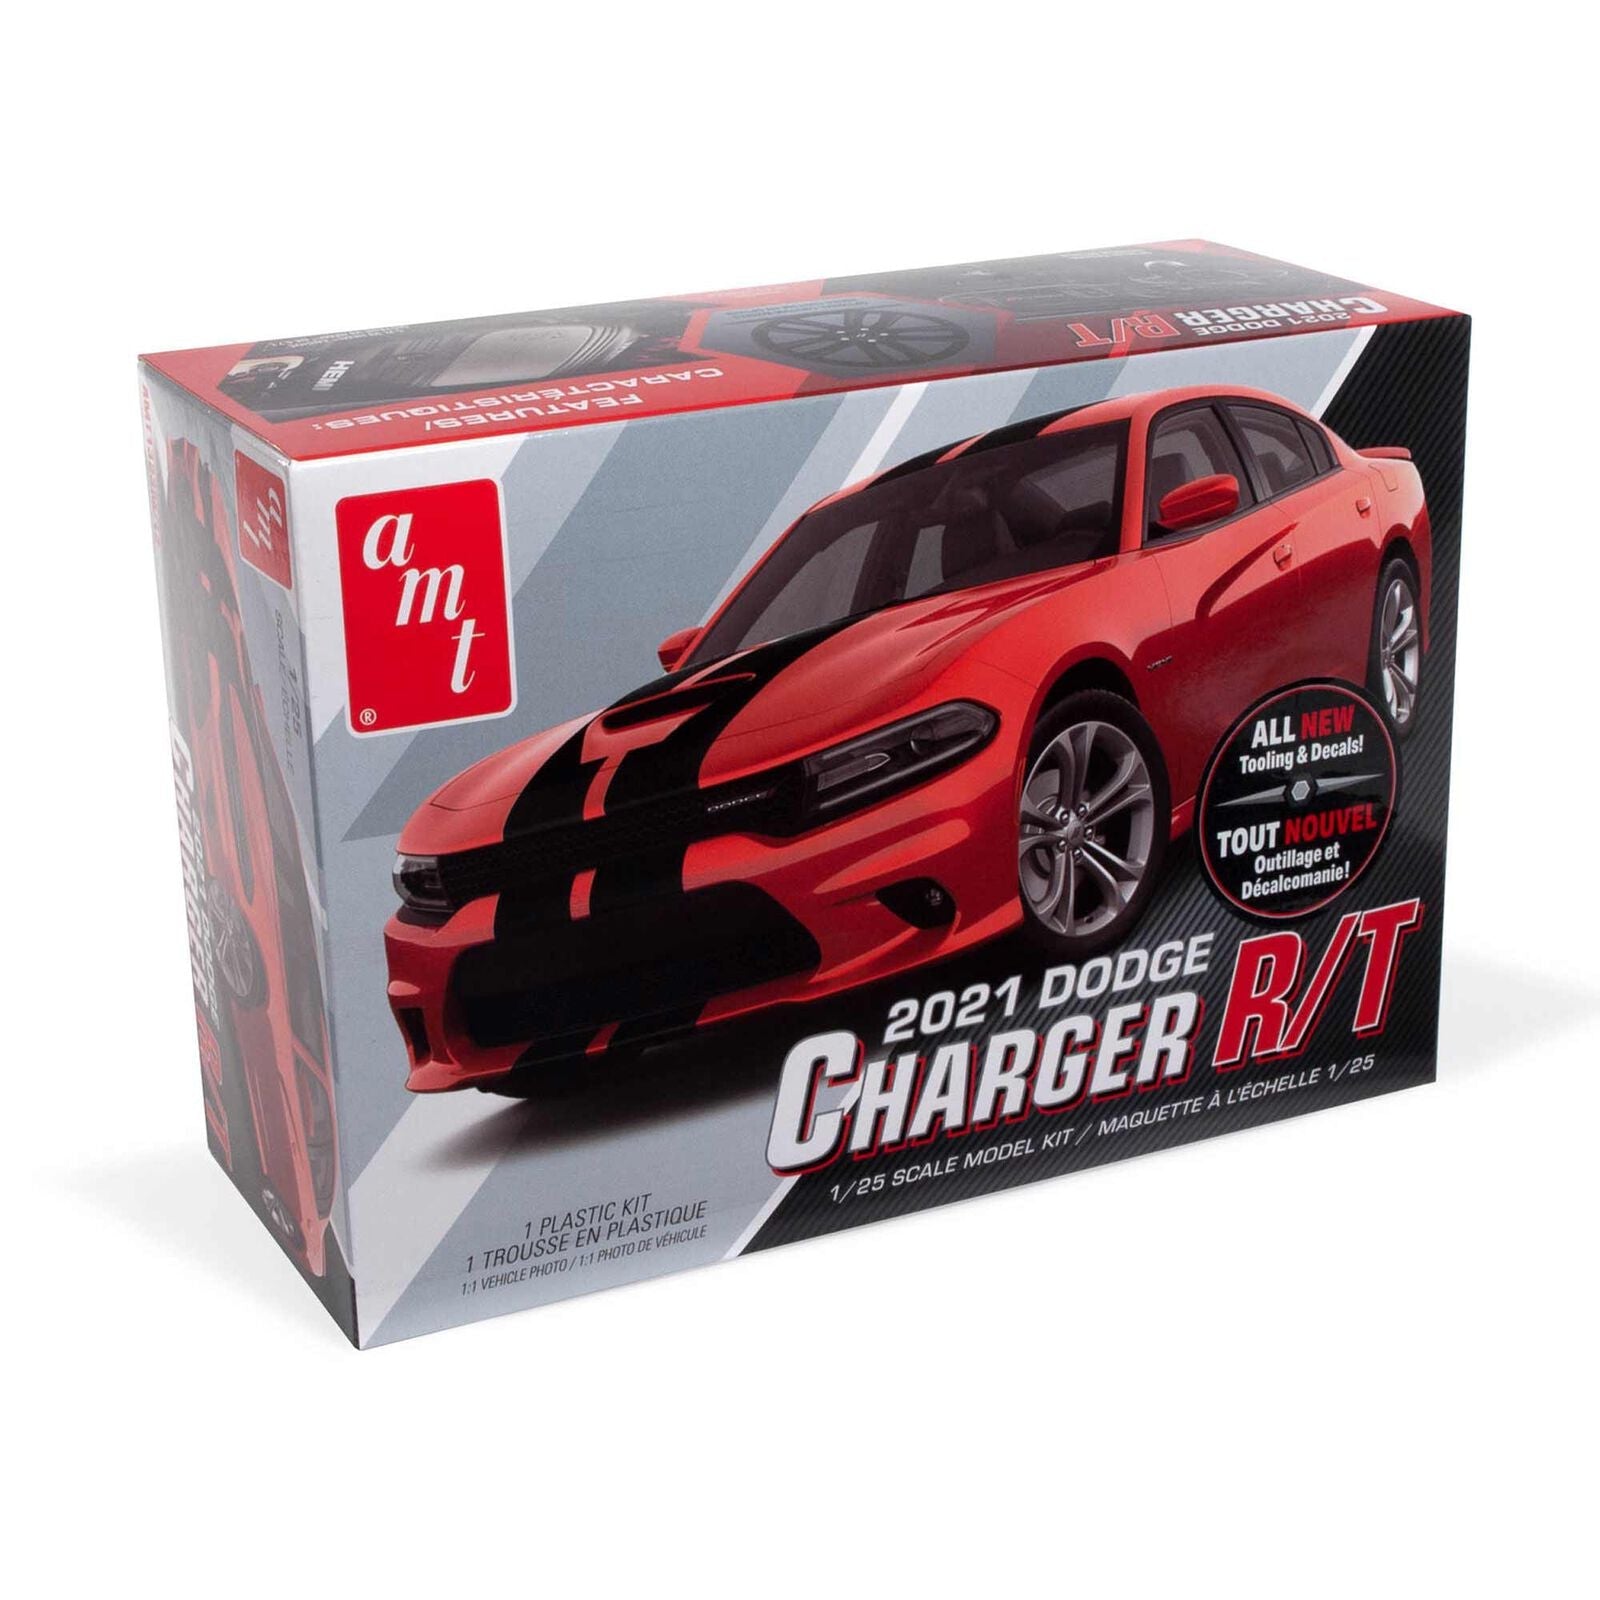 AMT 2021 Dodge Charger R/T Plastic Model Kit, 1/25 Scale - Micro - Mark Scale Model Kits